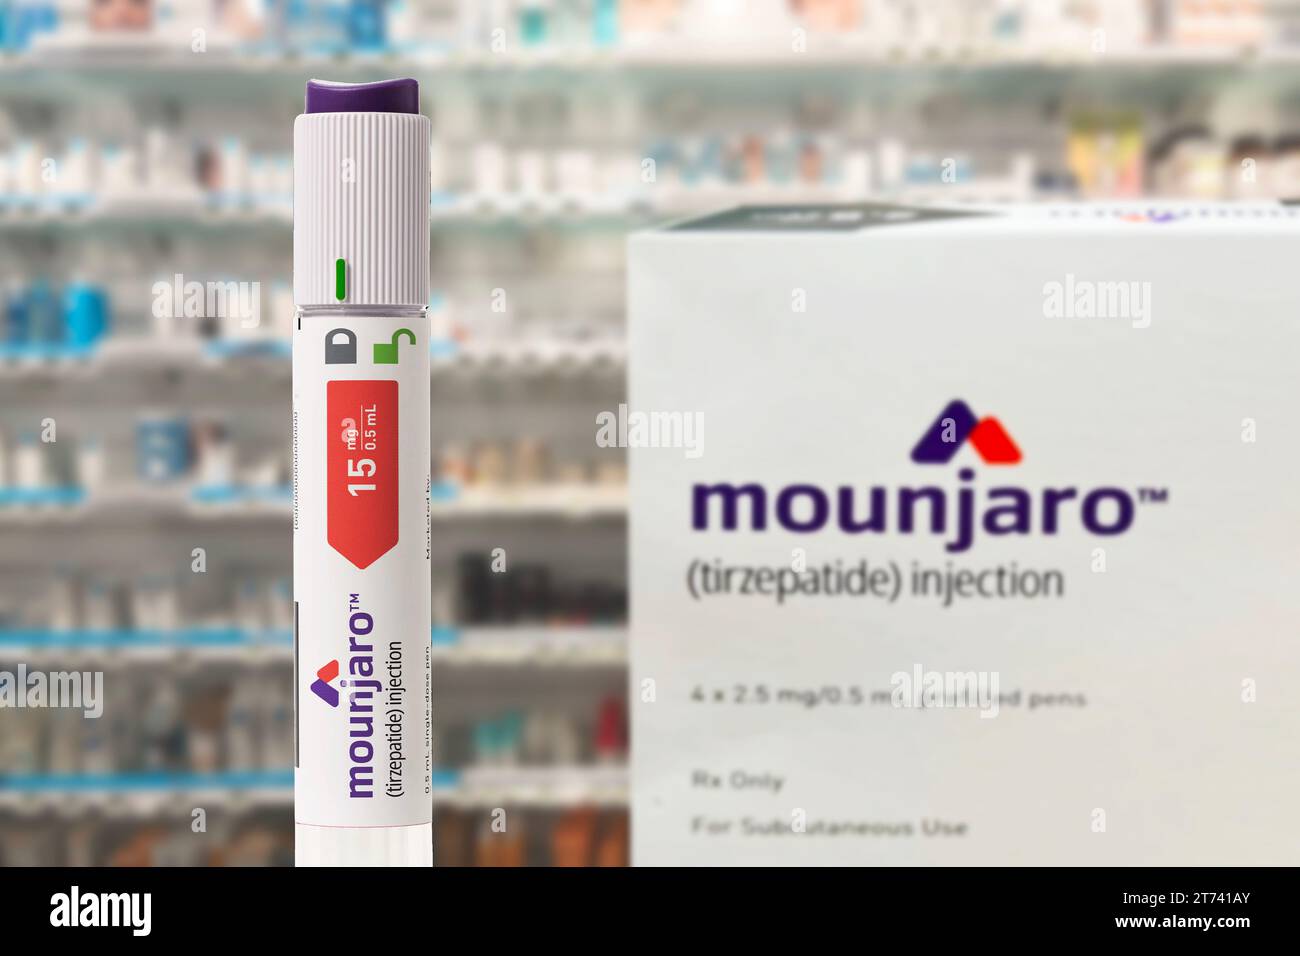 Mounjaro - Tirzepatide with injection pen is an antidiabetic medication used for the treatment of diabetes and to lose weight. Focus on foreground. Co Stock Photo